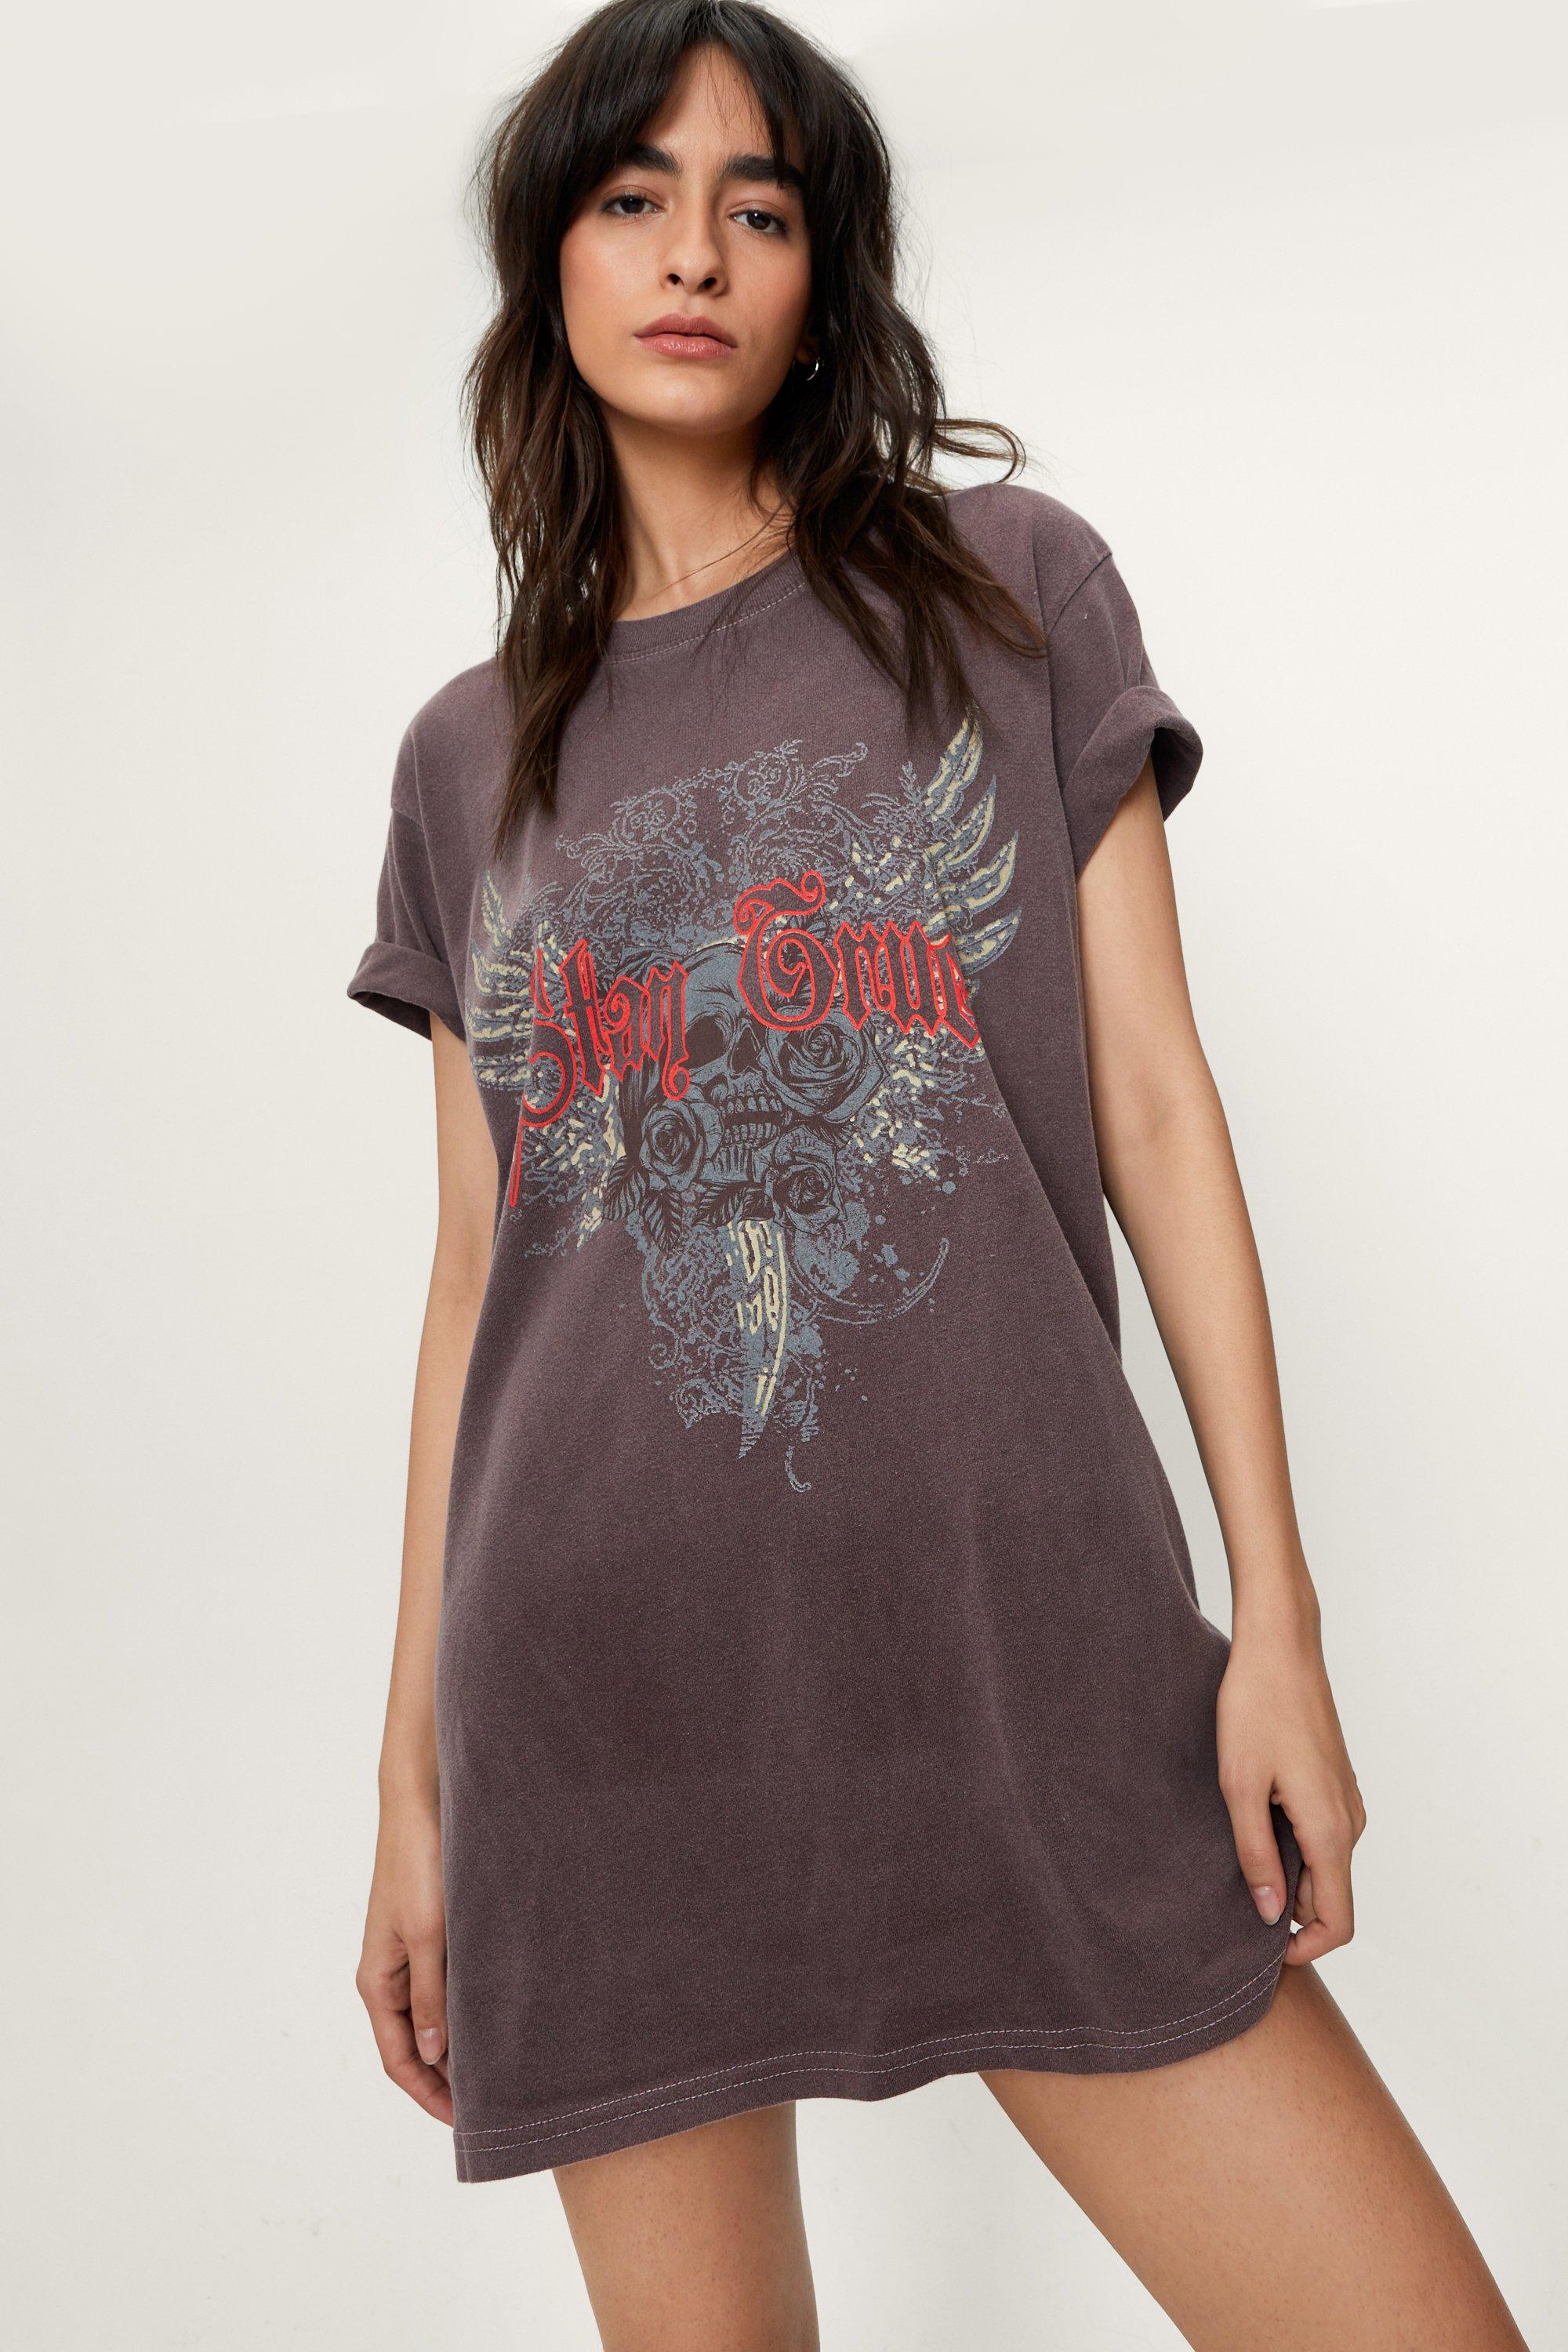 Stay True Oversized Graphic T-Shirt ...